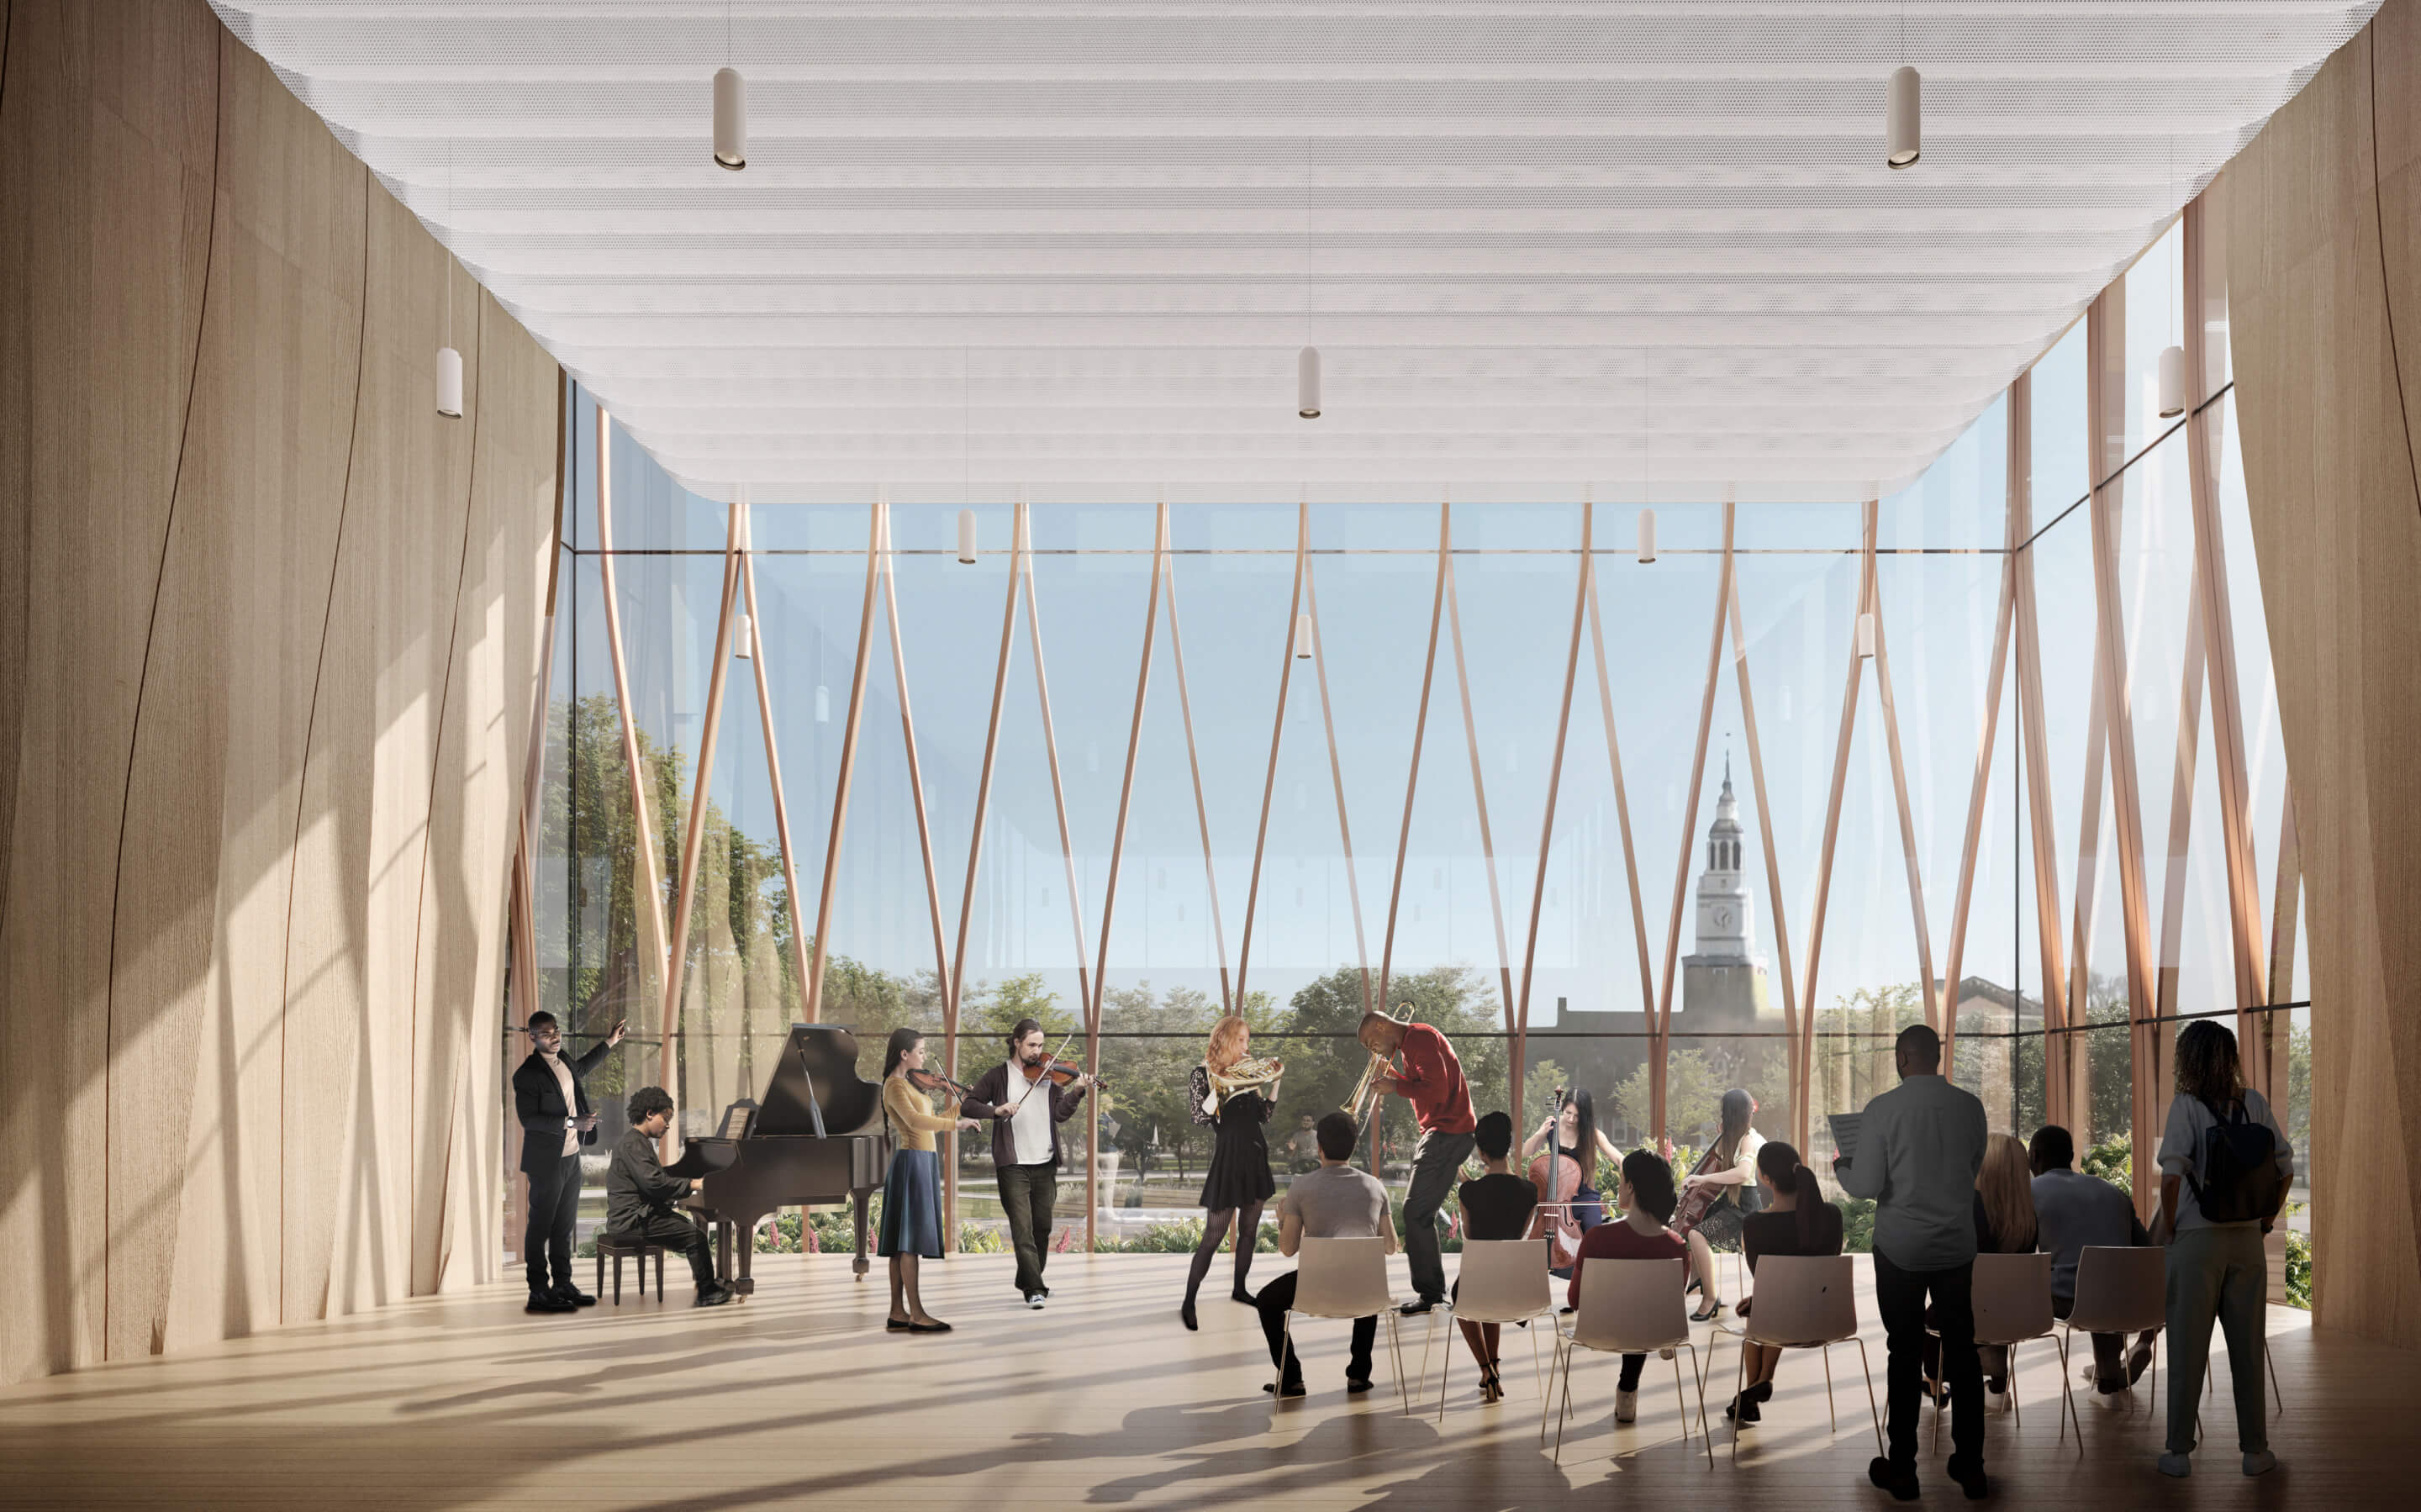 rendering of a performance space with soaring windows looking out into a campus